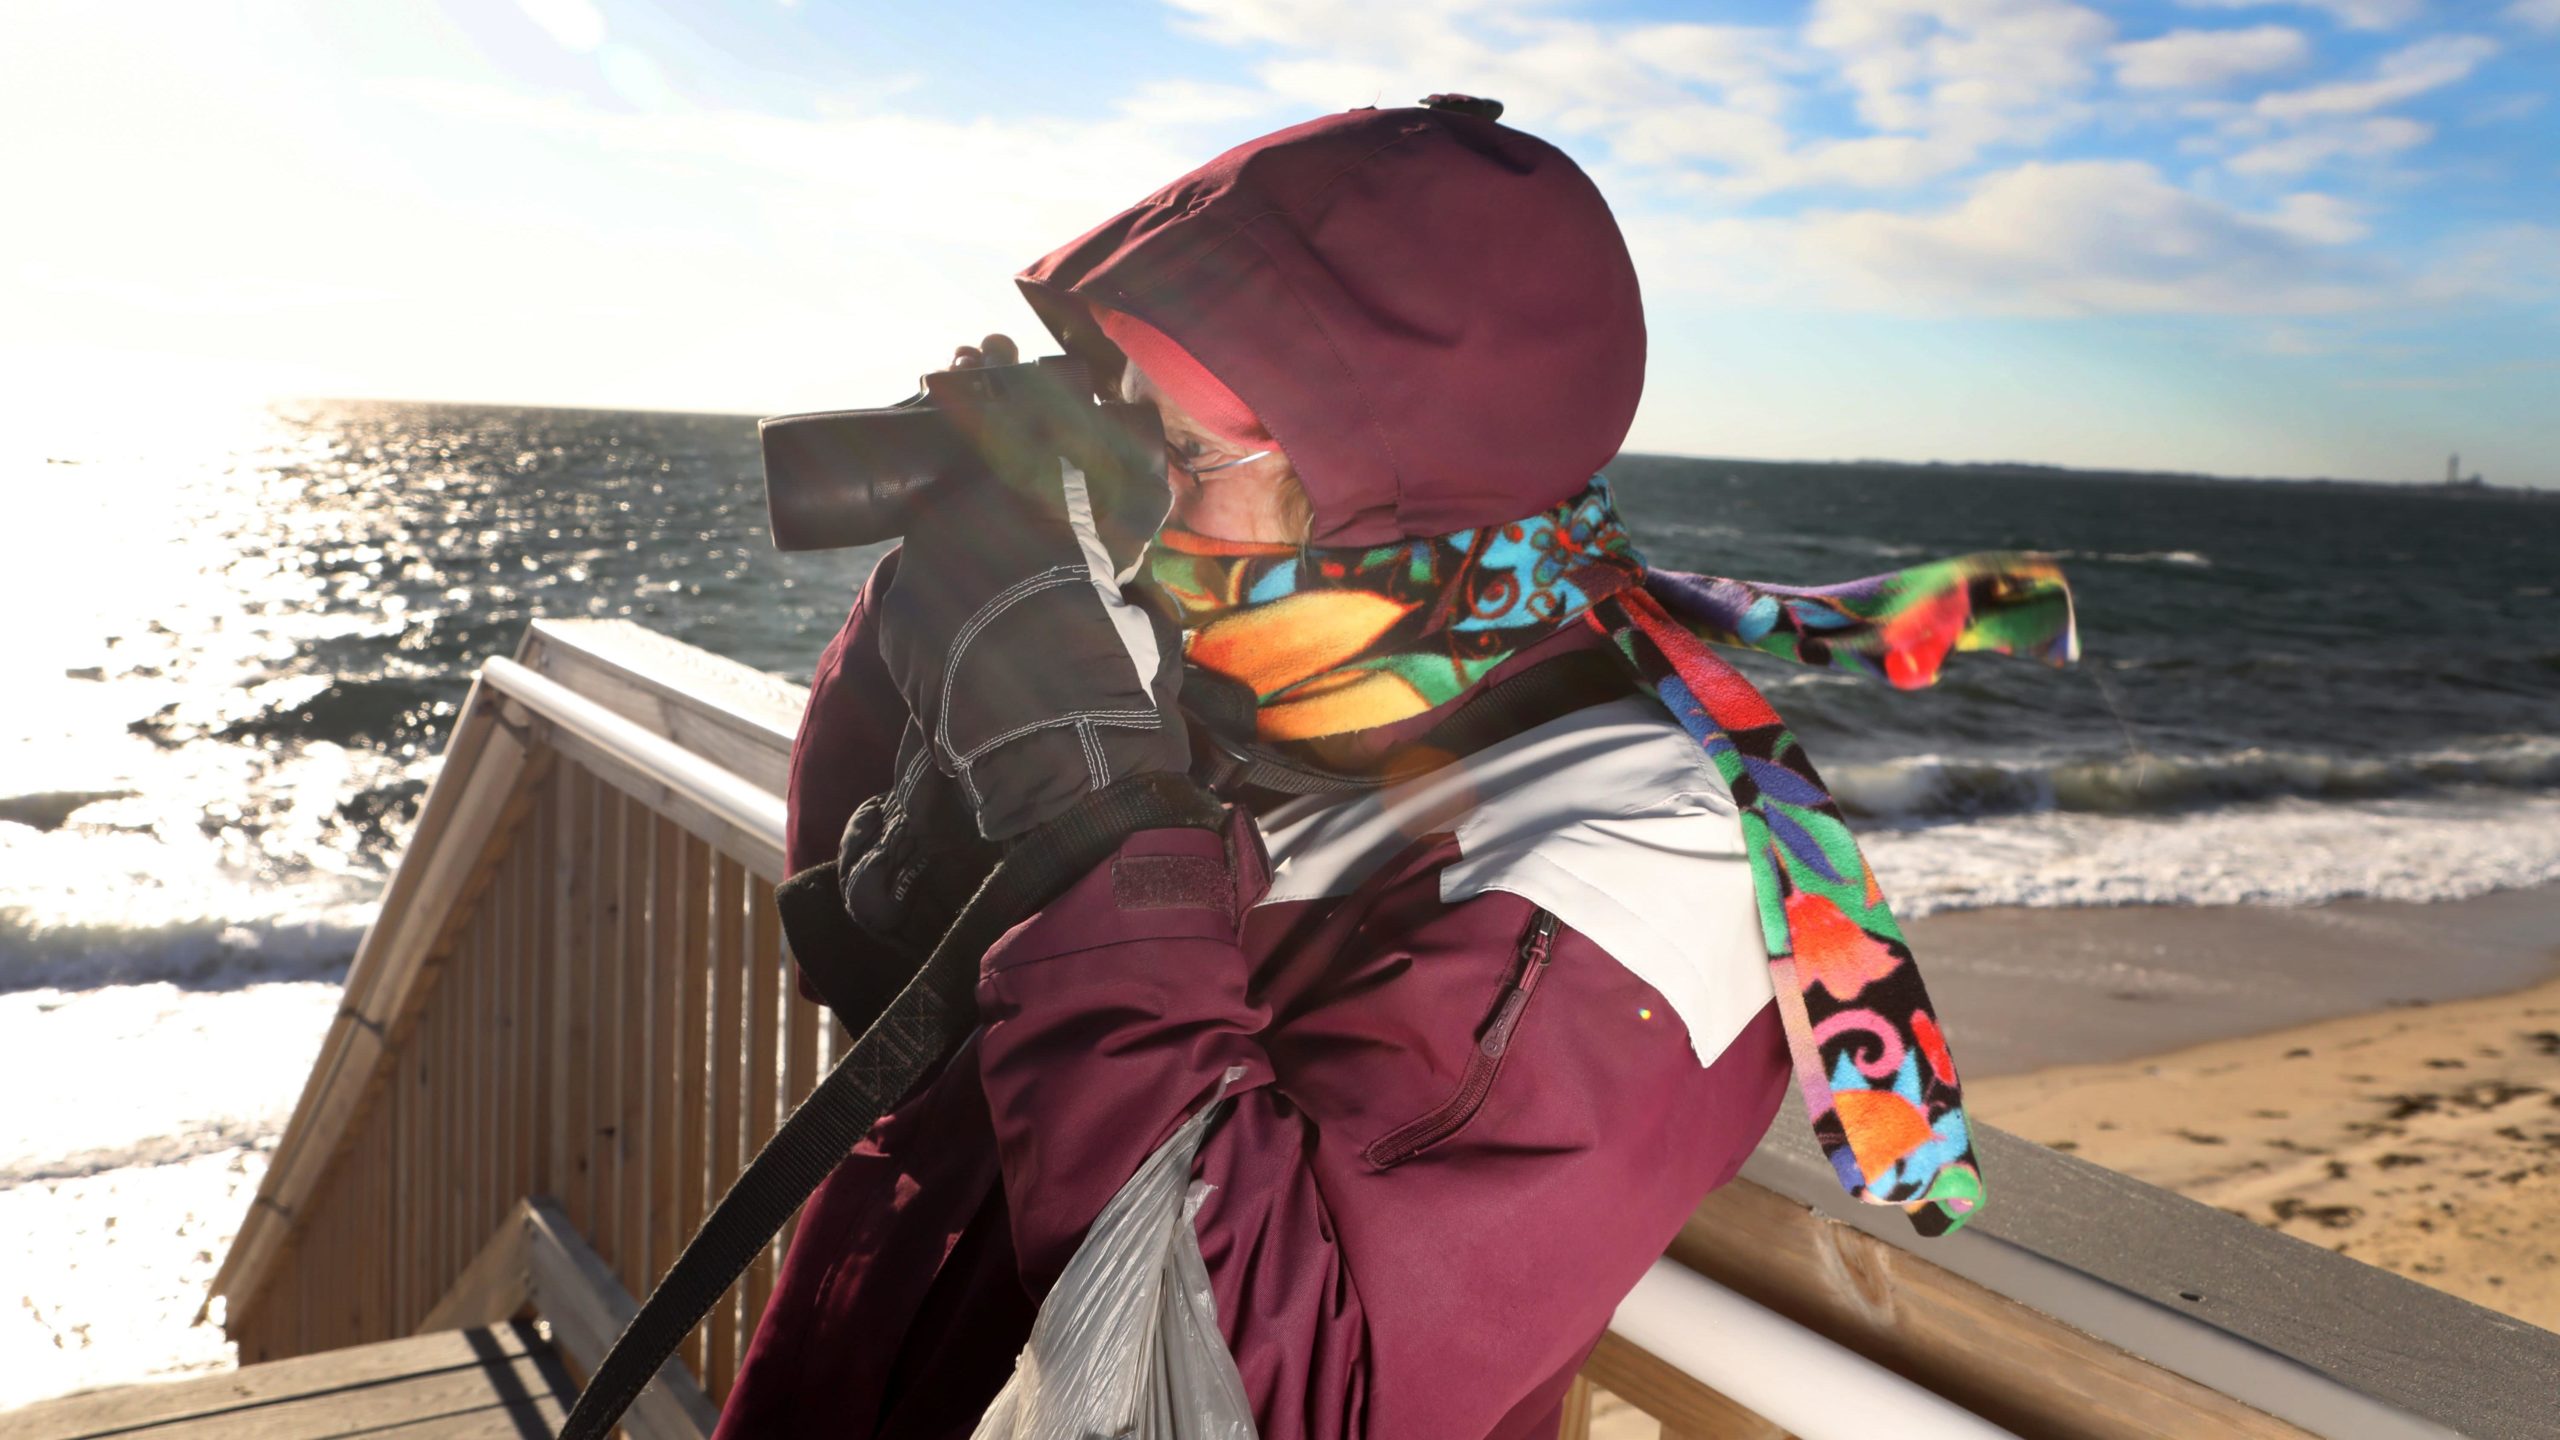 Nancy Braun from Truro looks through binoculars at Noons Landing on Cape Cod as she searches for endangered sea turtles washed up on shore and cold-stunned on December 3, 2020.  (Photo: Lauren Owens Lambert / AFP, Getty Images)